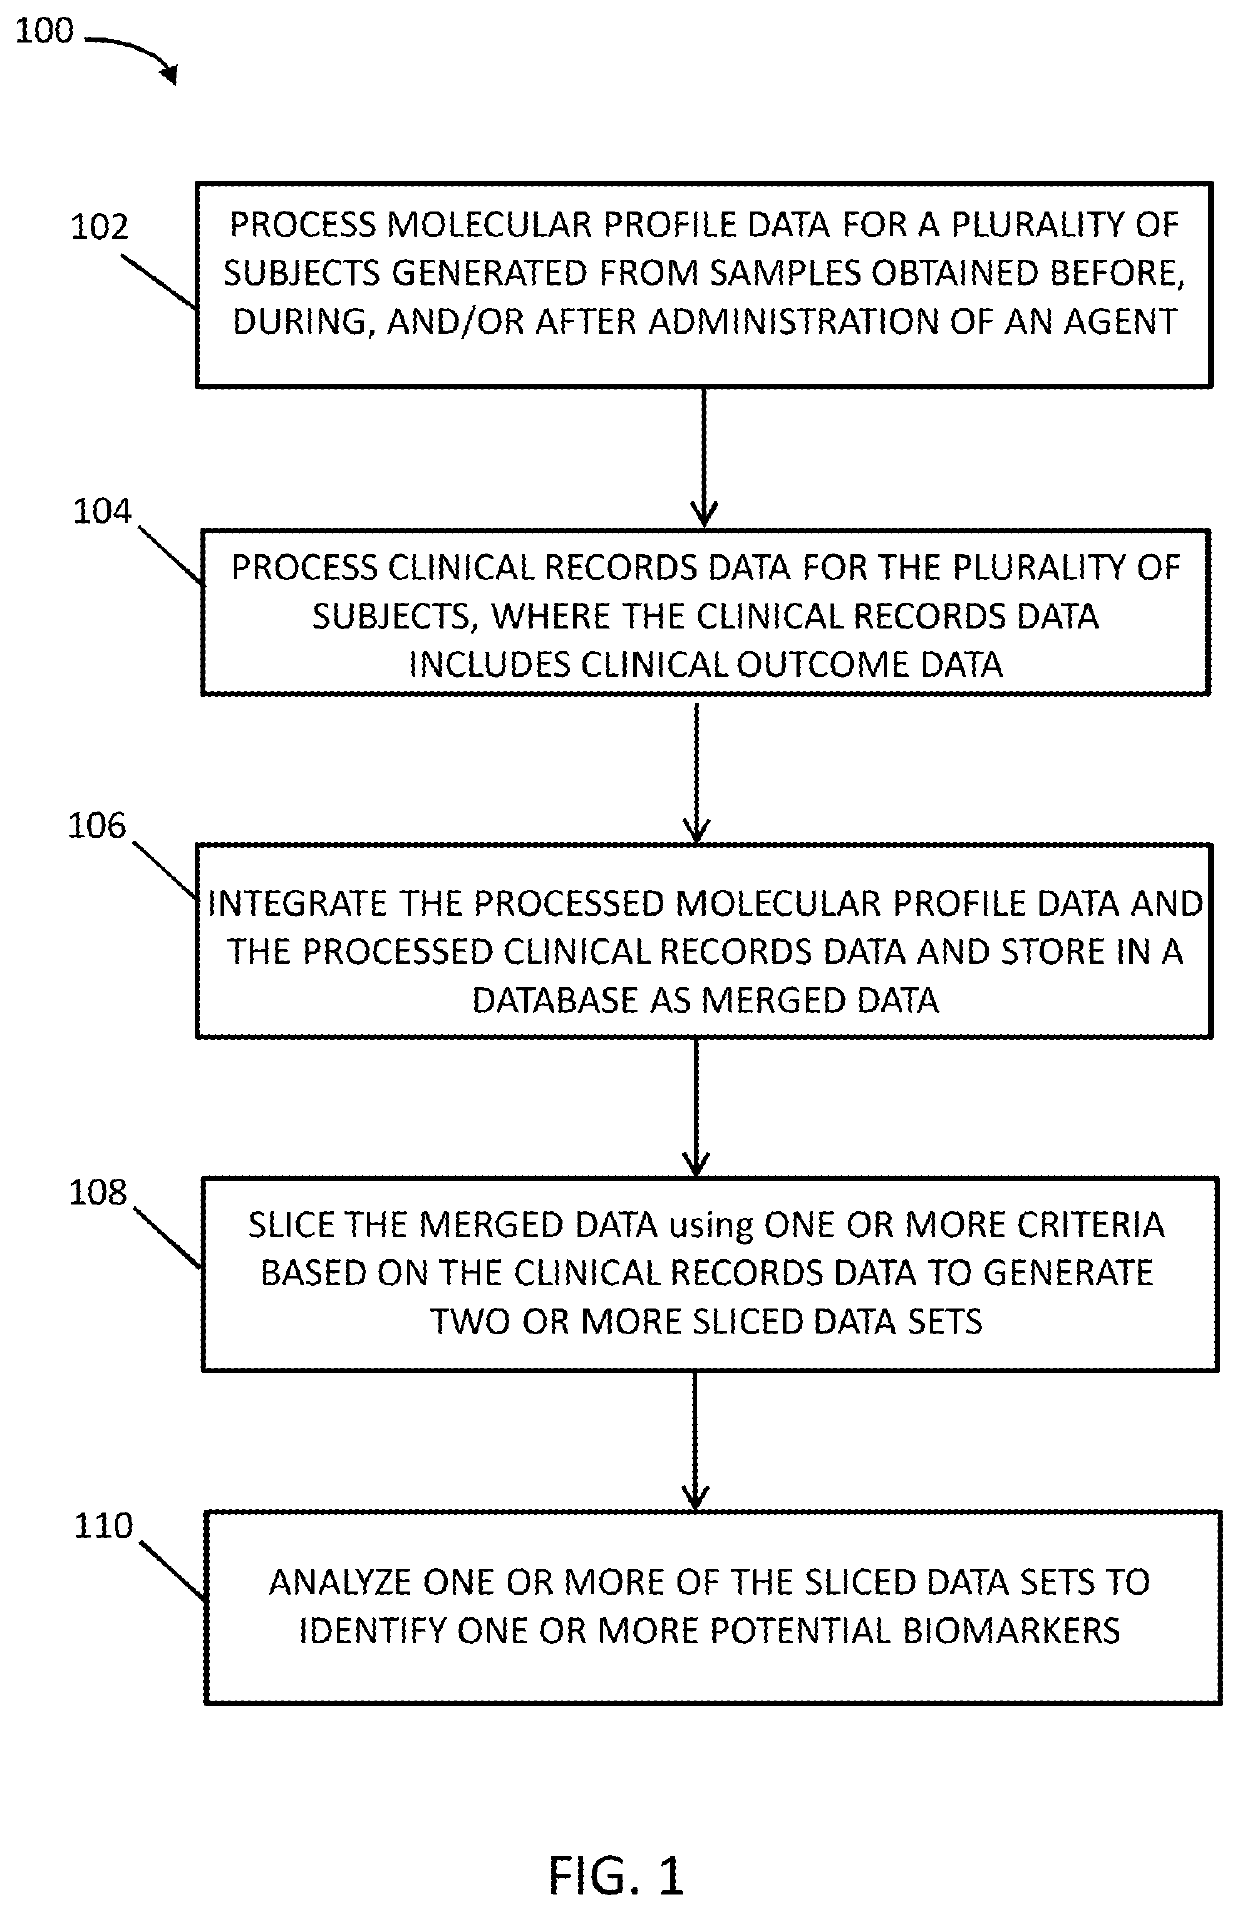 Systems and methods for patient stratification and identification of potential biomarkers